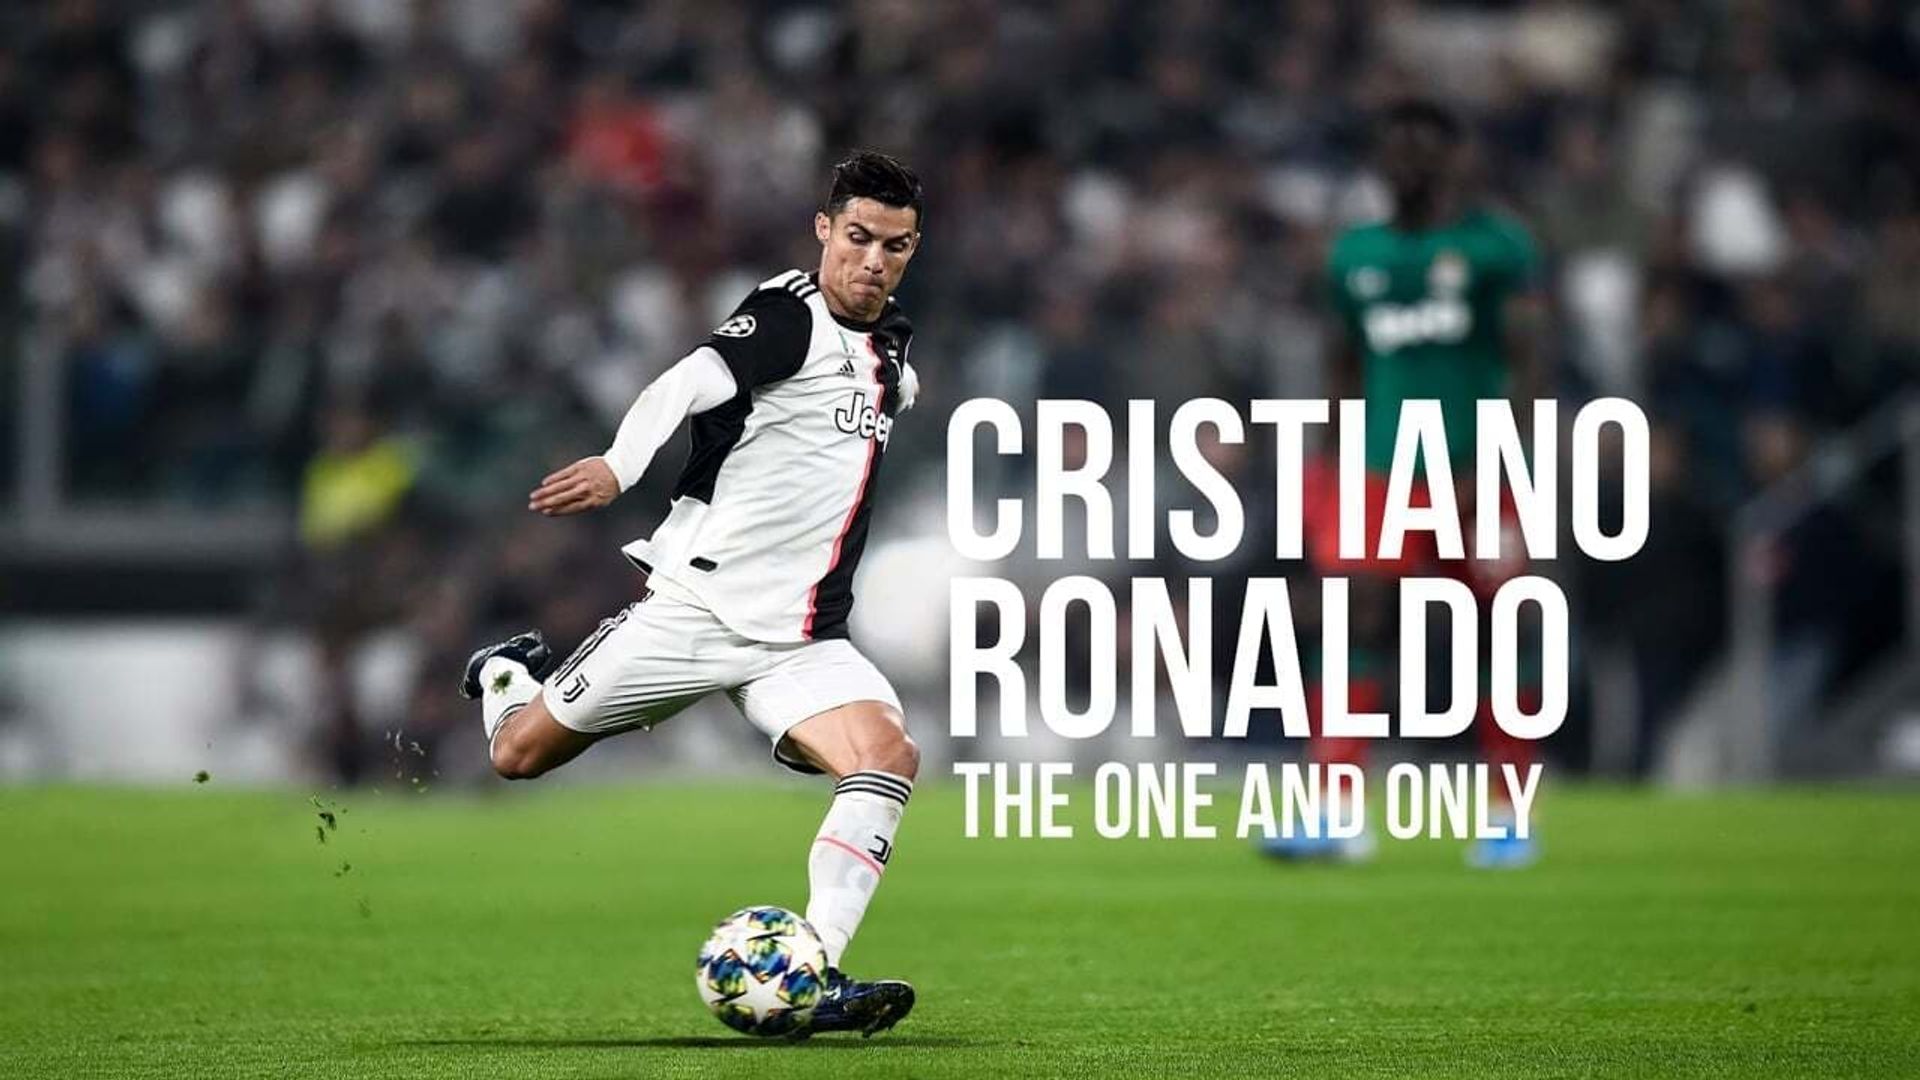 Cristiano Ronaldo: The One and Only background